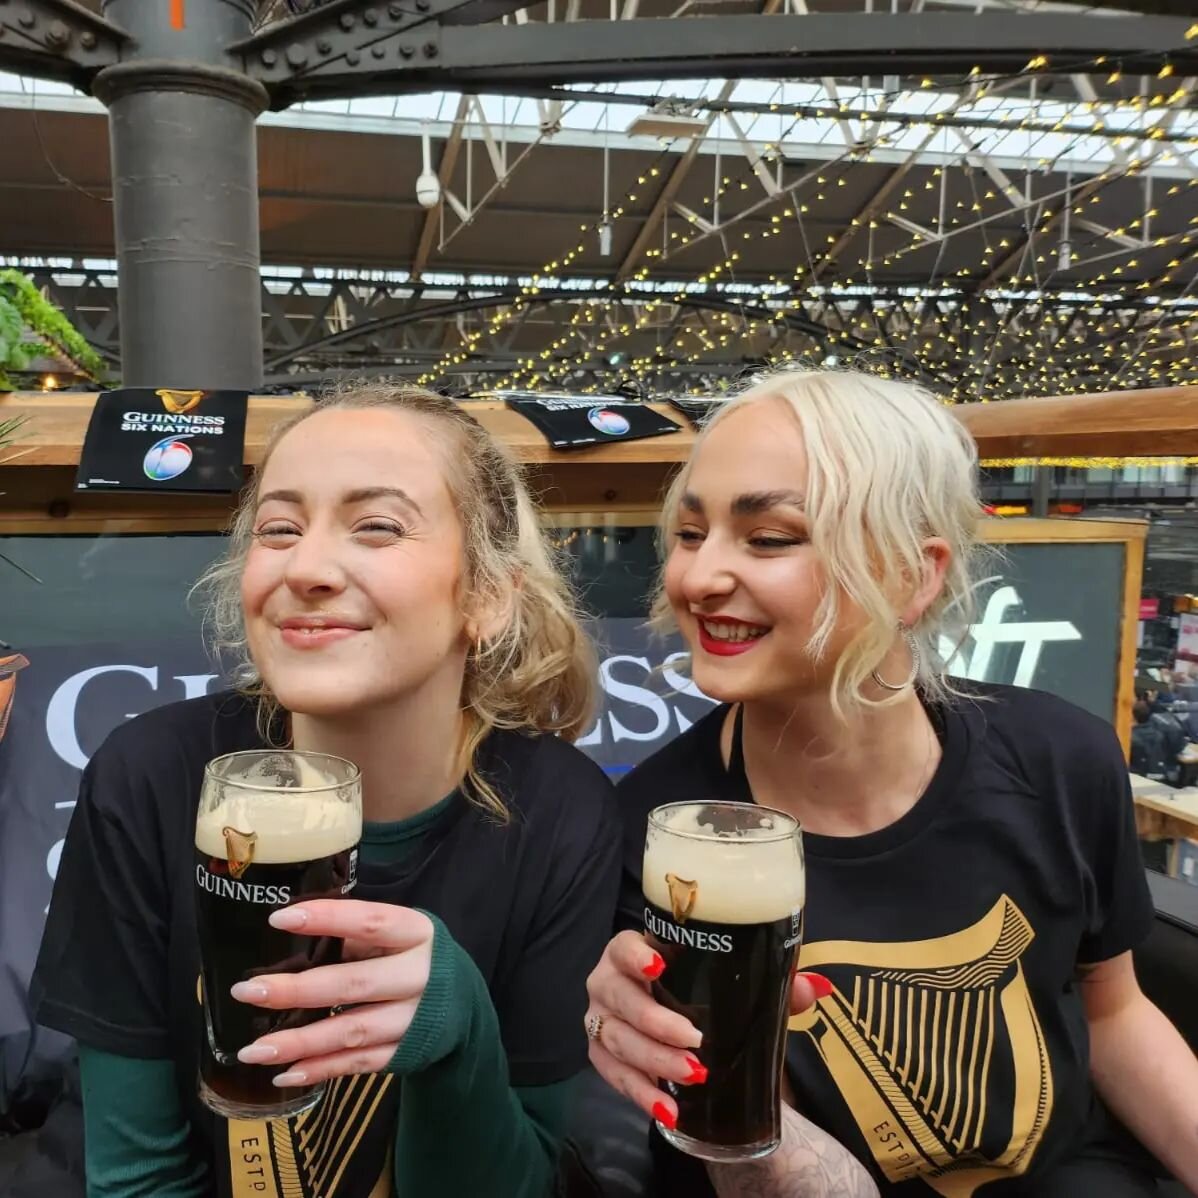 GUINNESS AT THE READY! 🏉 Six  Nations kicks off today + we are here for it - last minute tables avaliable just hit the link in our bio 🙌 
TODAY
Wales v Ireland 14.15
England v Scotlans 16.45
TOMORROW
Italy v France 15.00

Non rugby tables available